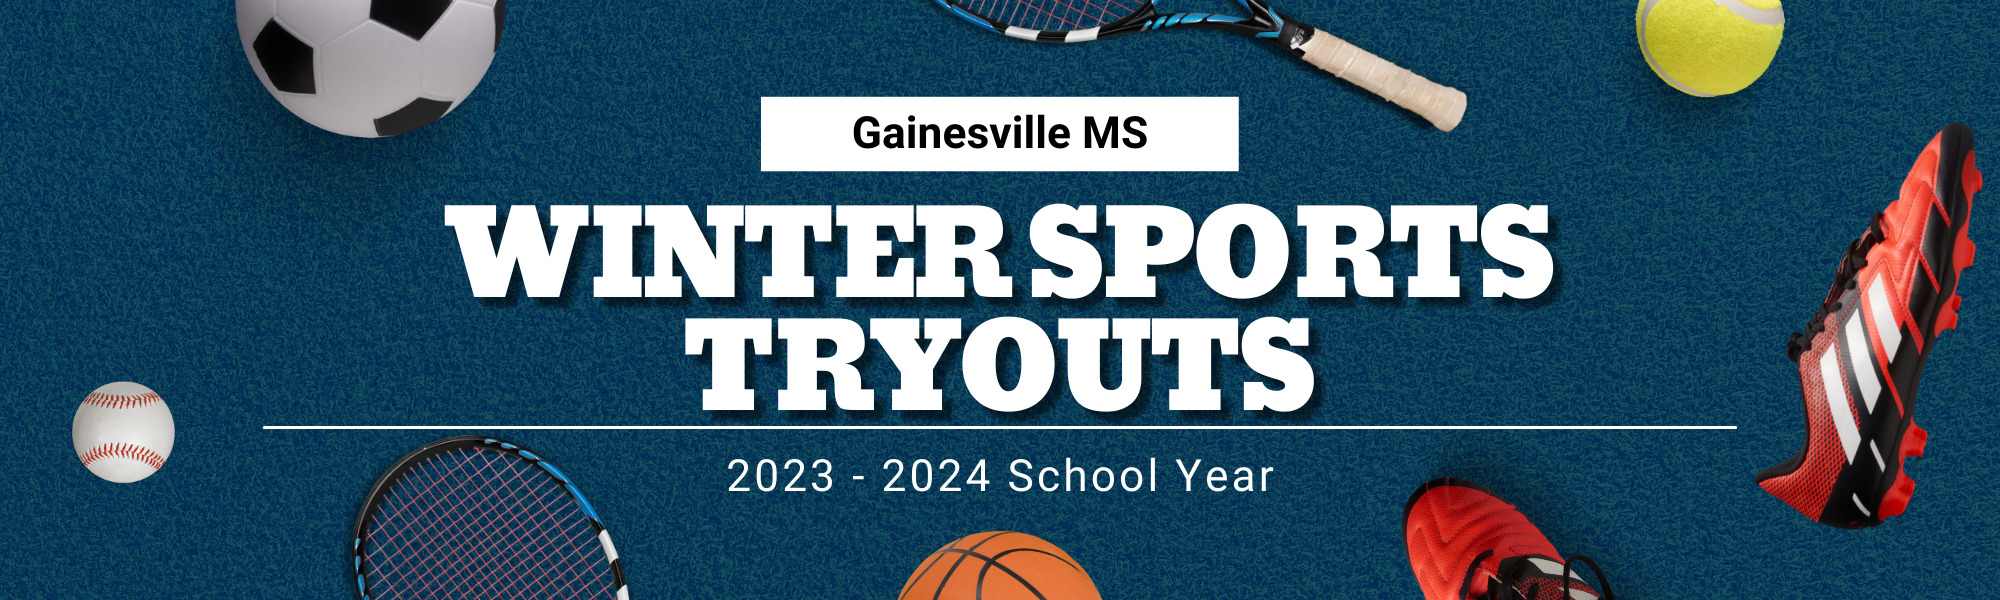 GVMS Winter Sports Tryouts 23-24